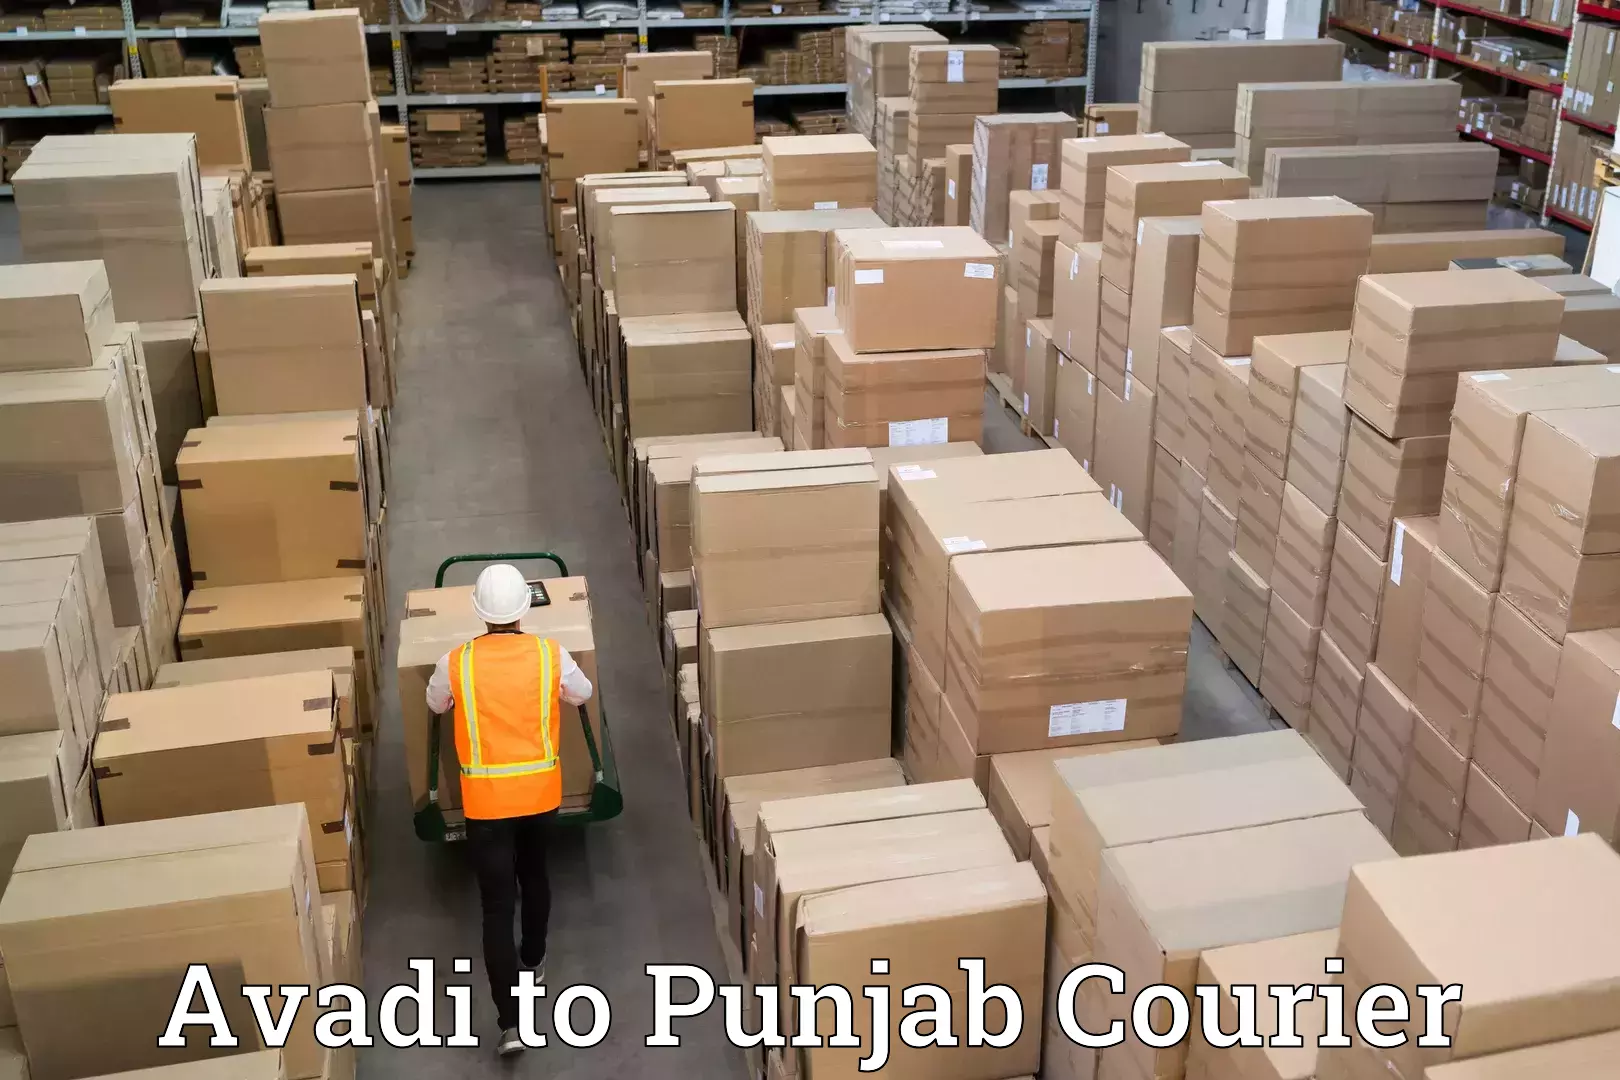 Moving and handling services in Avadi to Punjab